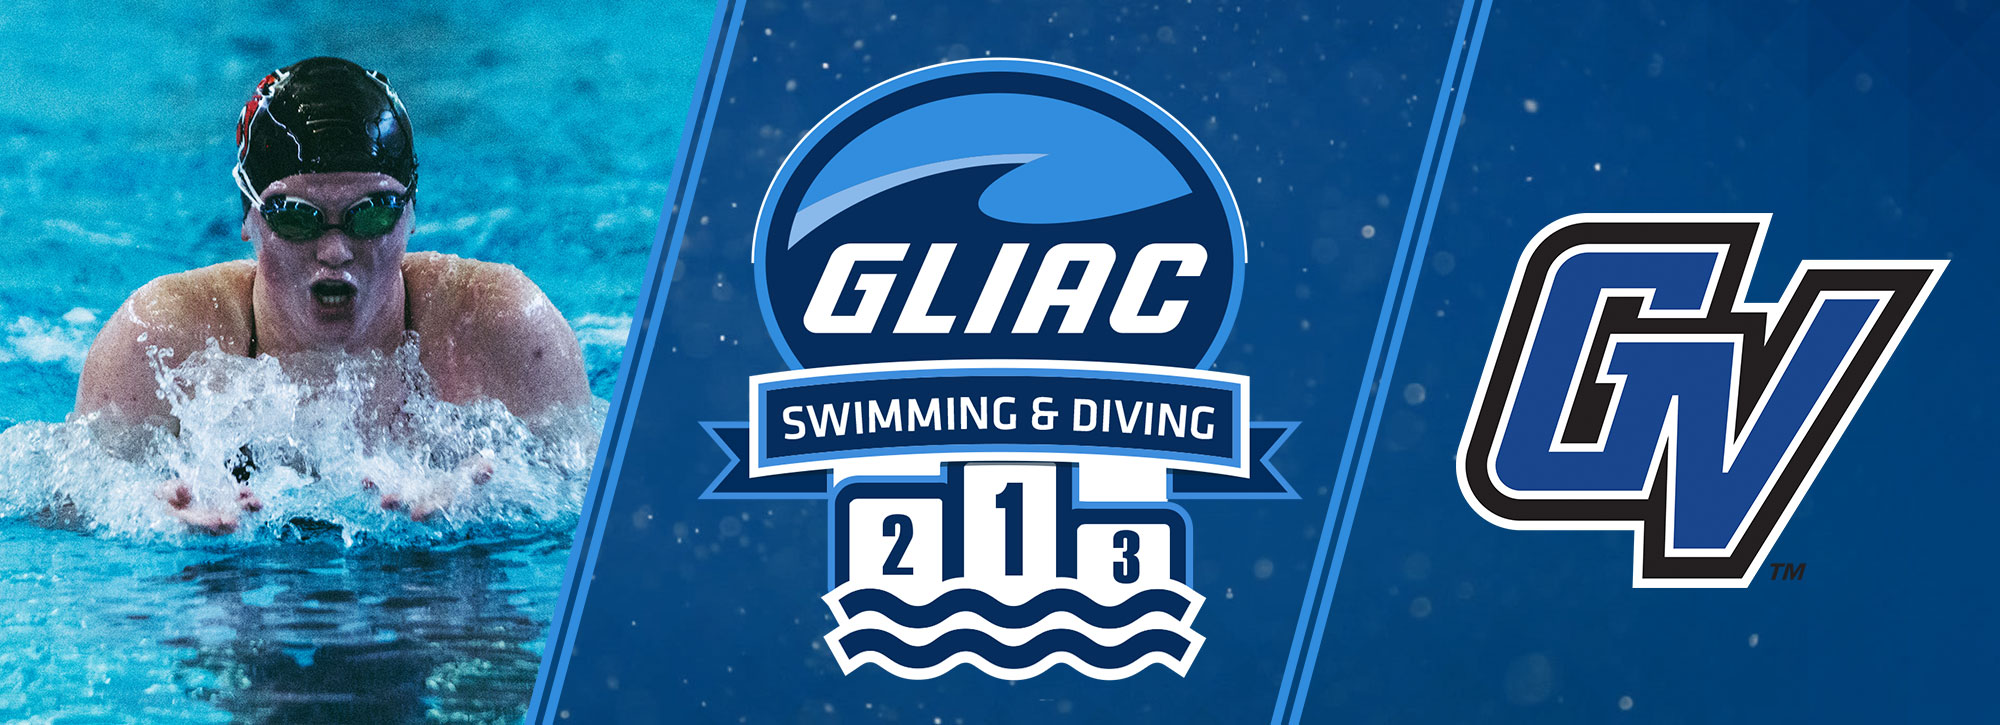 Davenport's Postmus, Grand Valley State's Goodyear Selected GLIAC Swimming Athletes of the Week